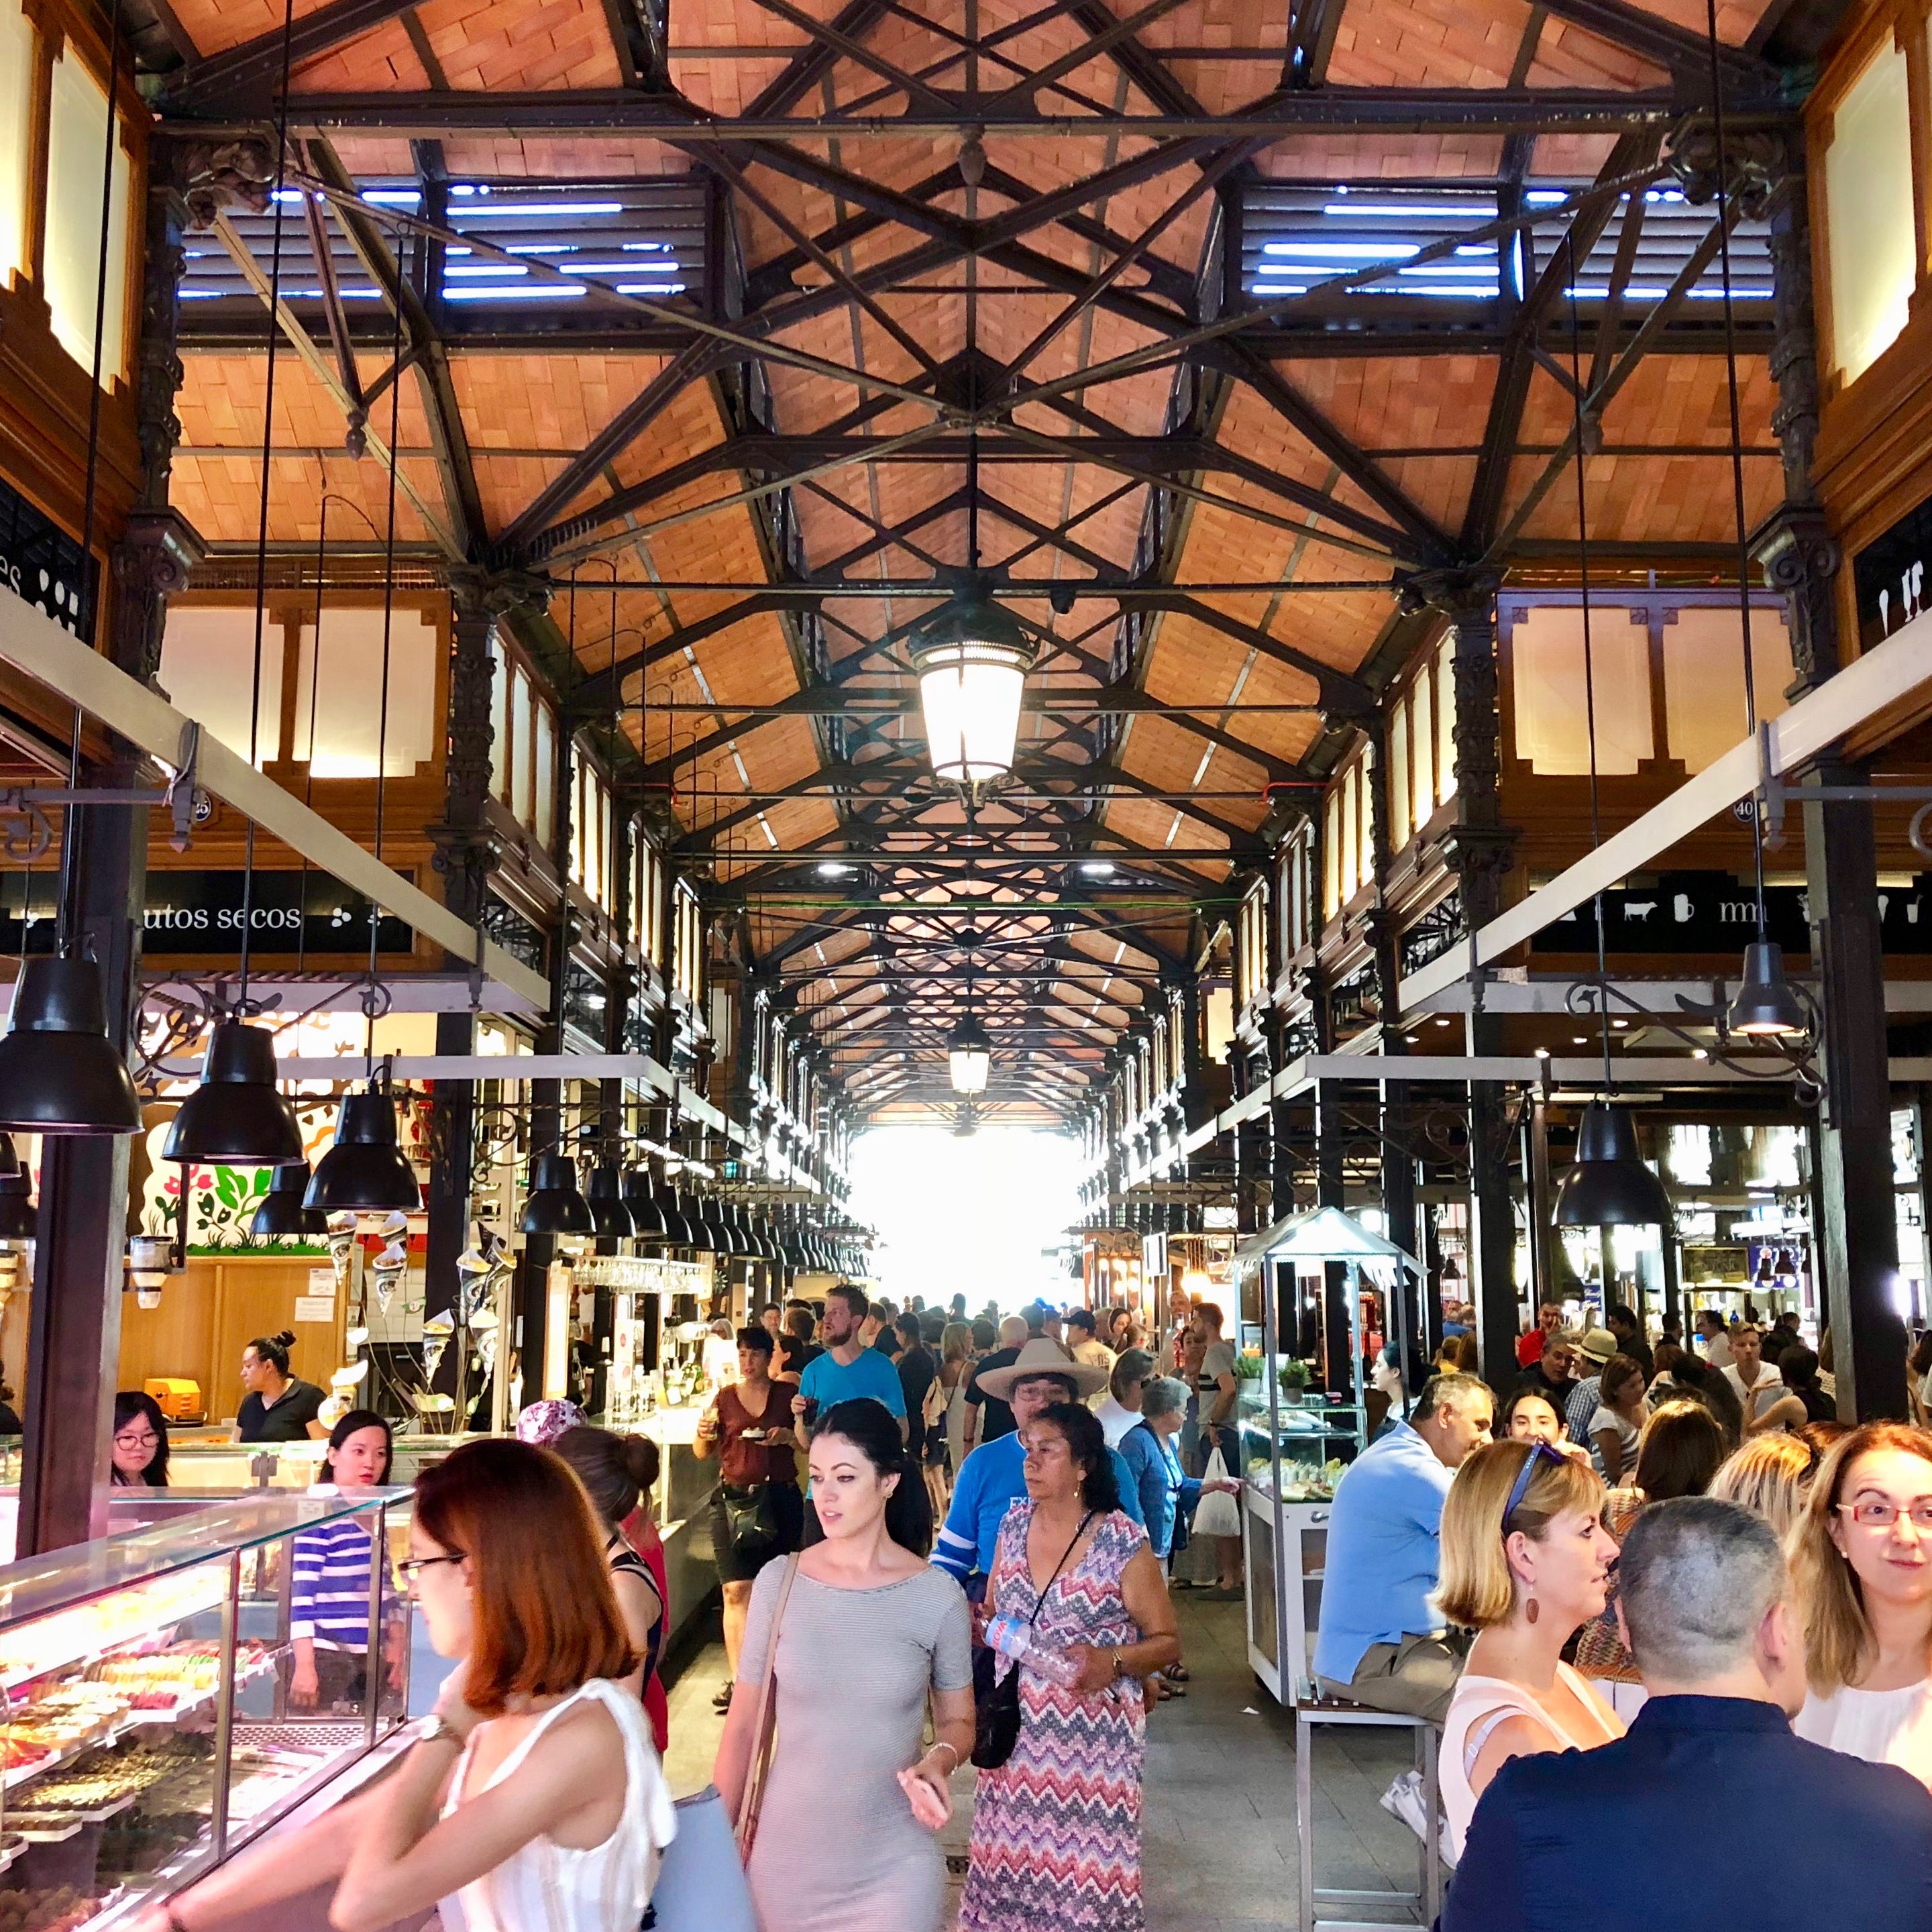 The market was reopened in 2009 as a gourmet food market.